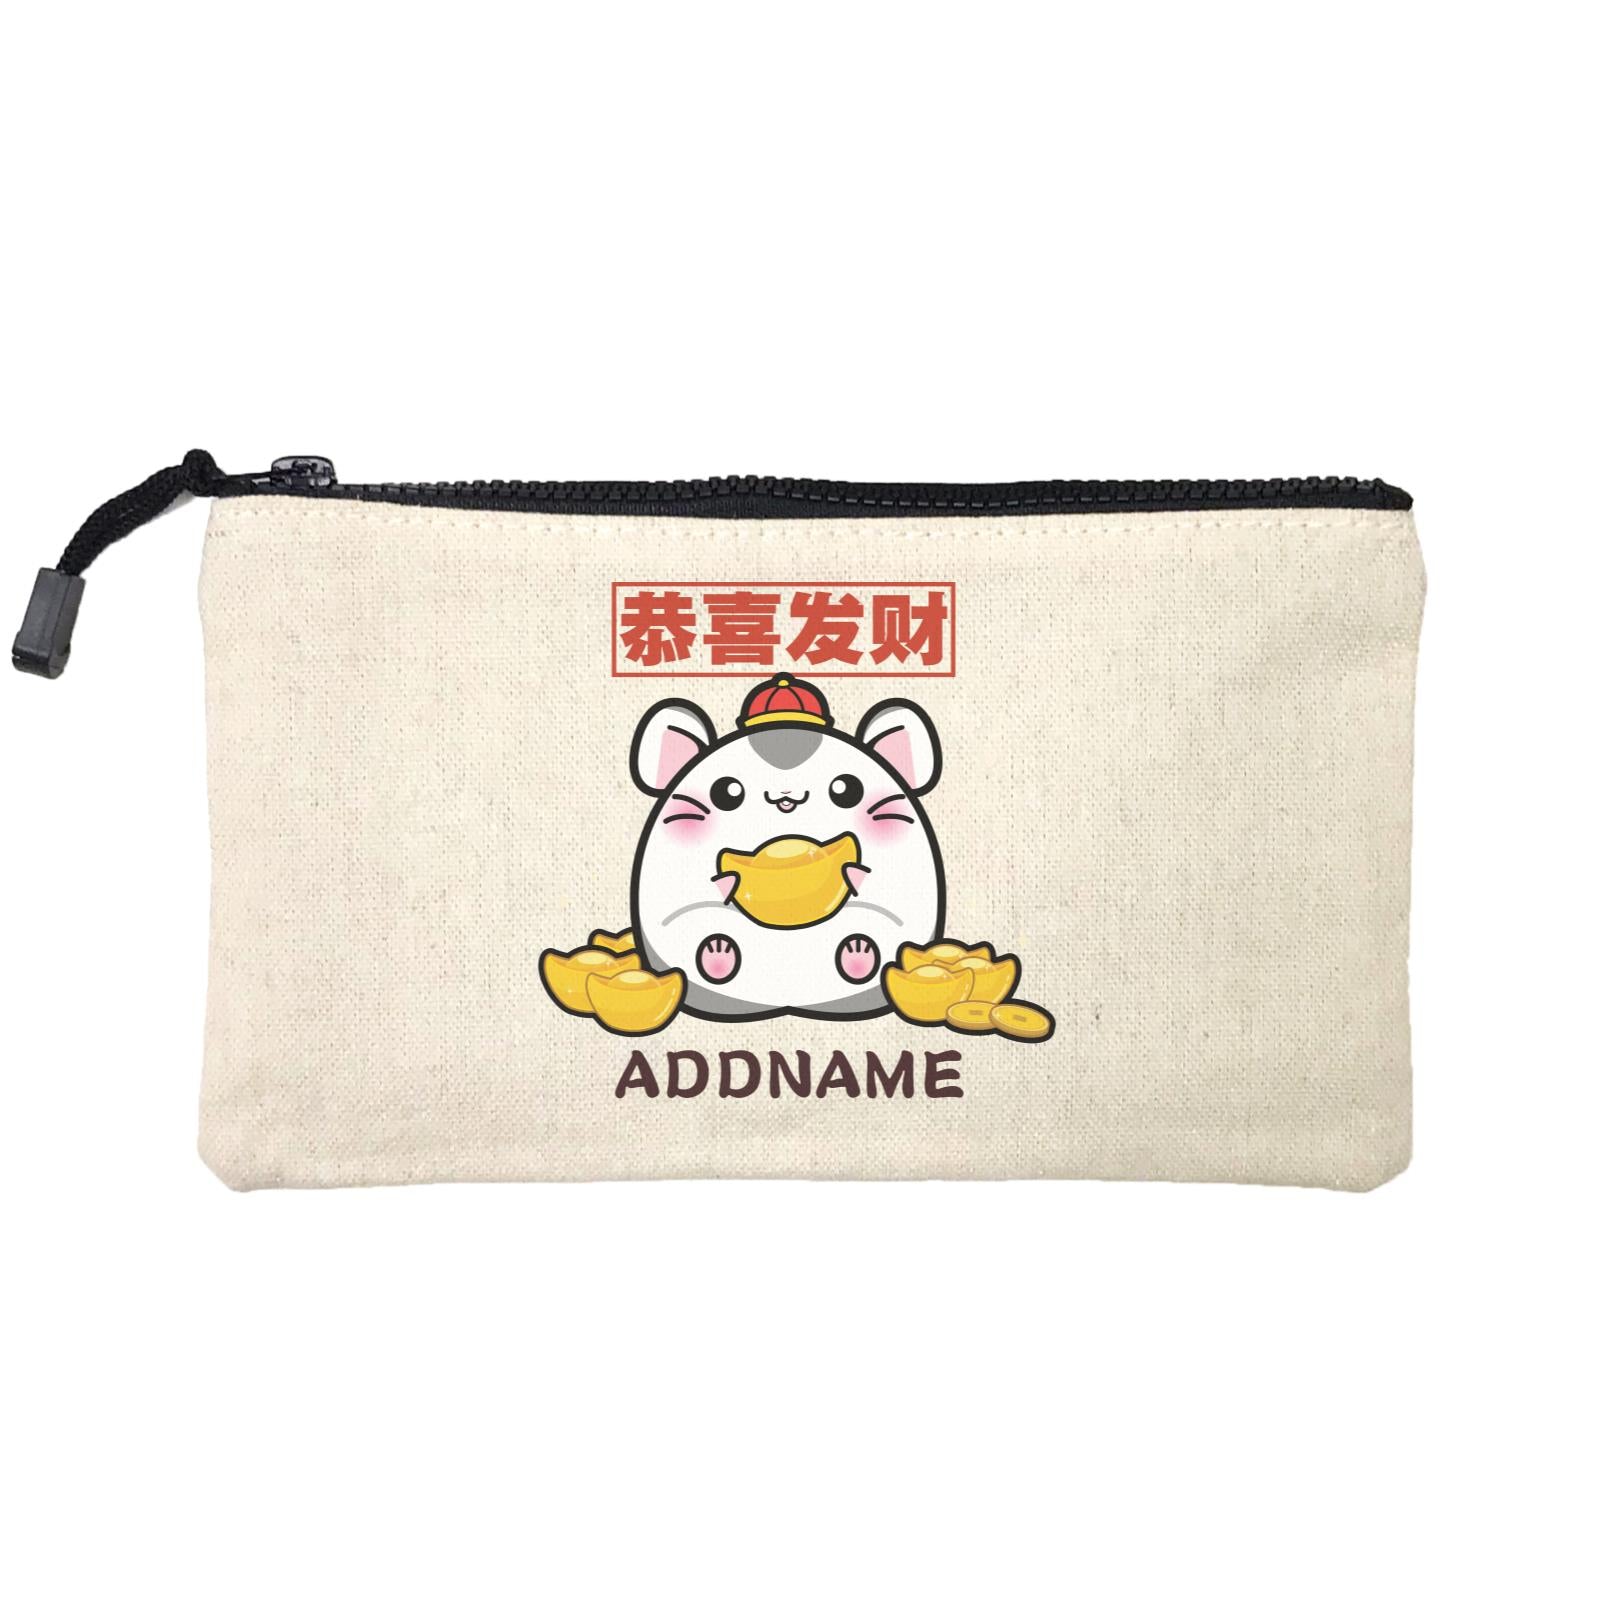 Prosperous Mouse Series Golden Jim Wishes Happy Prosperity Mini Accessories Stationery Pouch